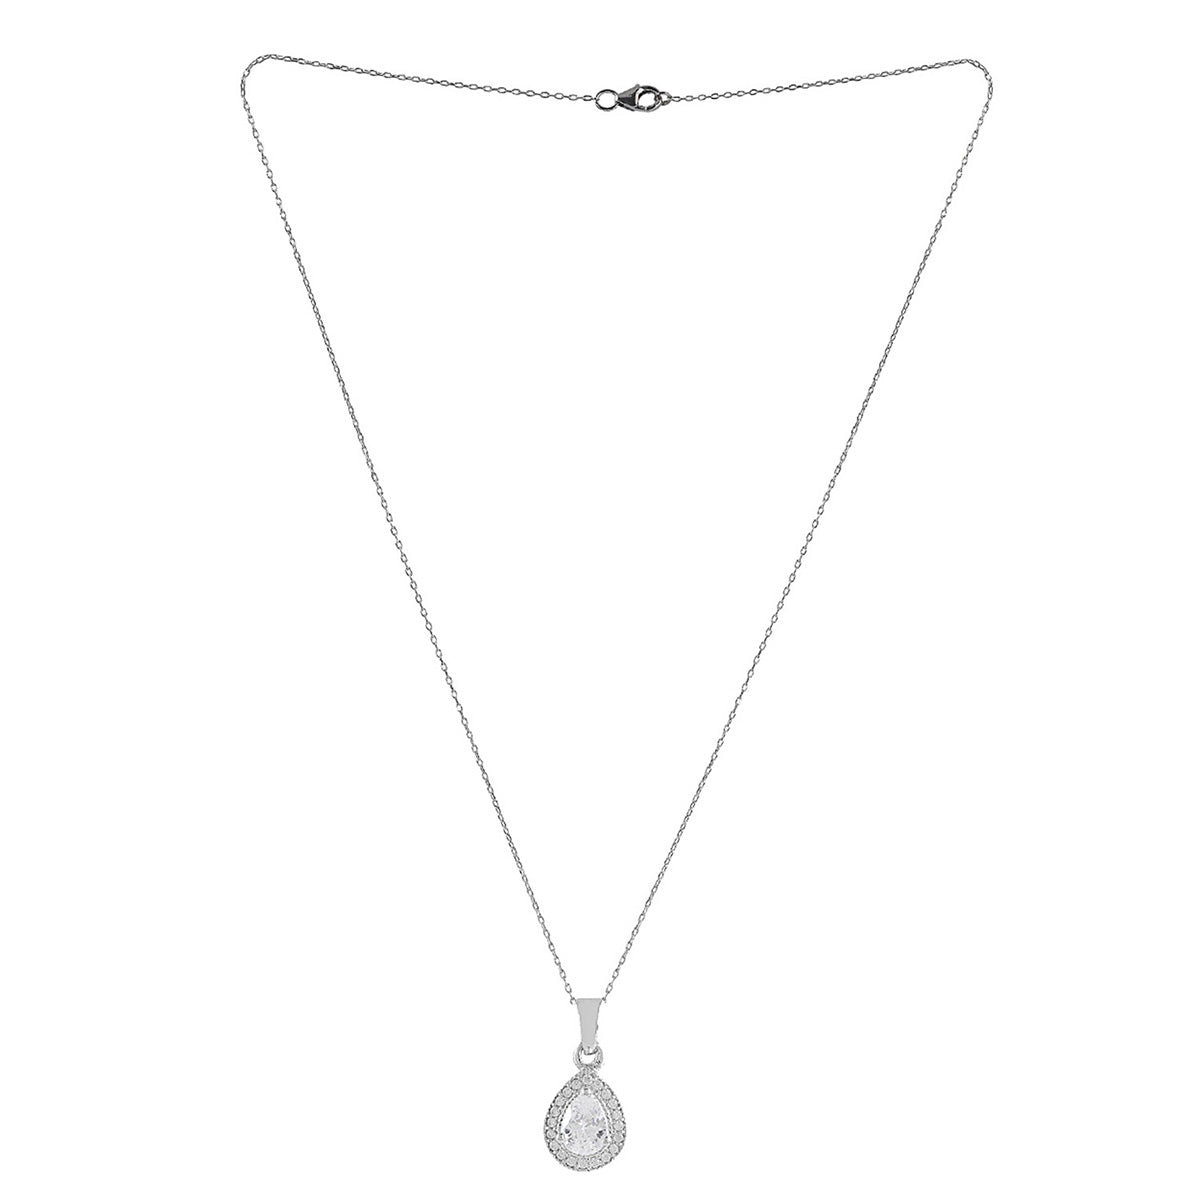 Thomas Sabo Silver Circle with White Stones Necklace - Andrew Berry  Jewellery